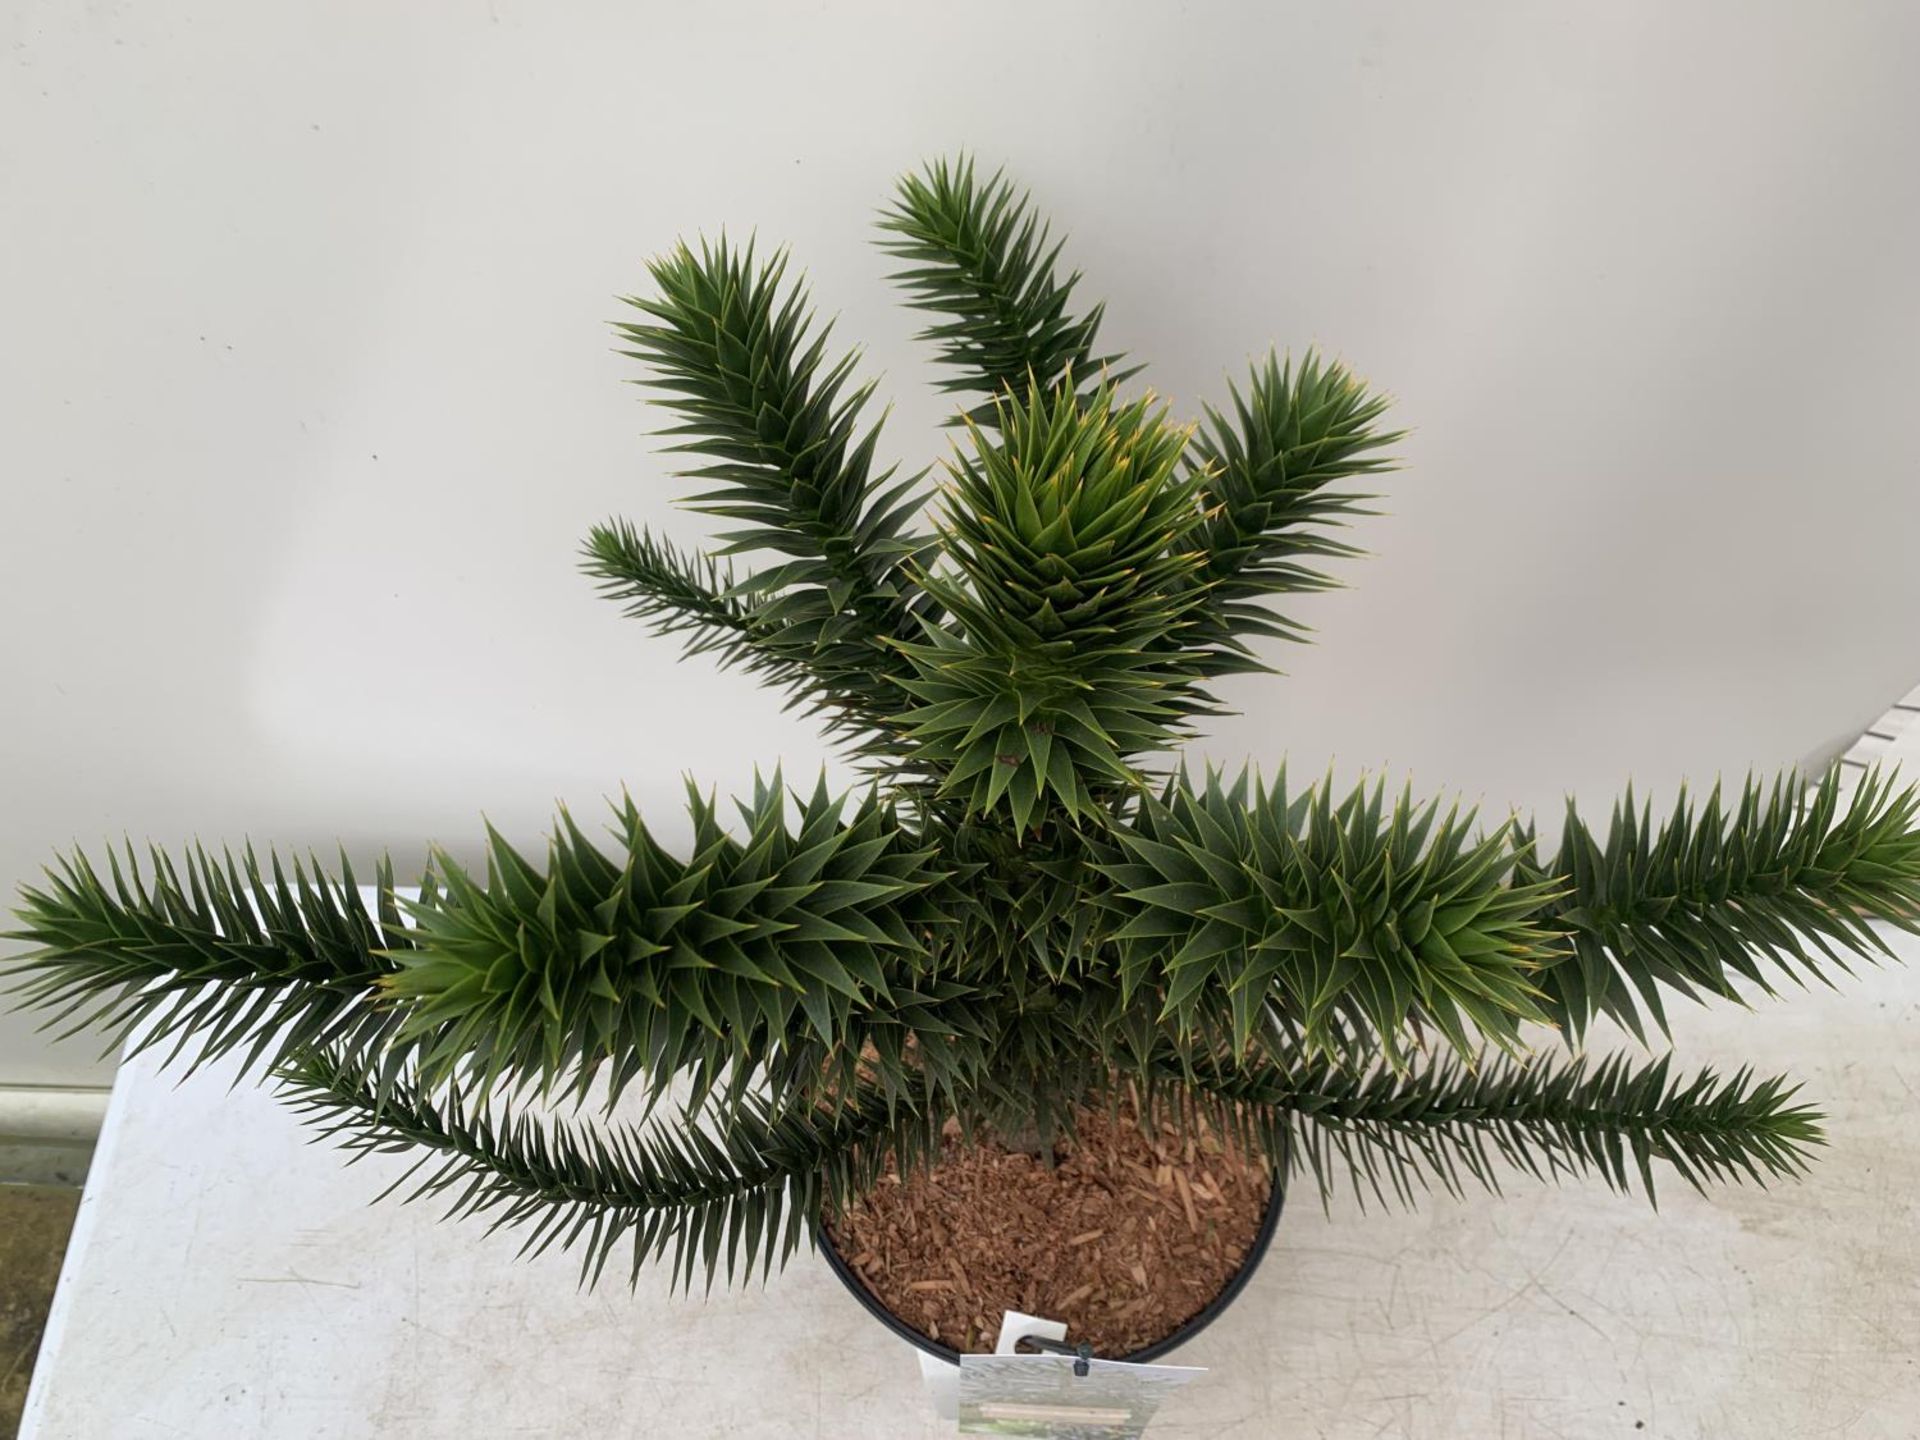 ONE MONKEY PUZZLE TREE ARAUCARIA ARAUCANA APPROX 70CM IN HEIGHT IN A 5 LTR POT PLUS VAT - Image 3 of 5